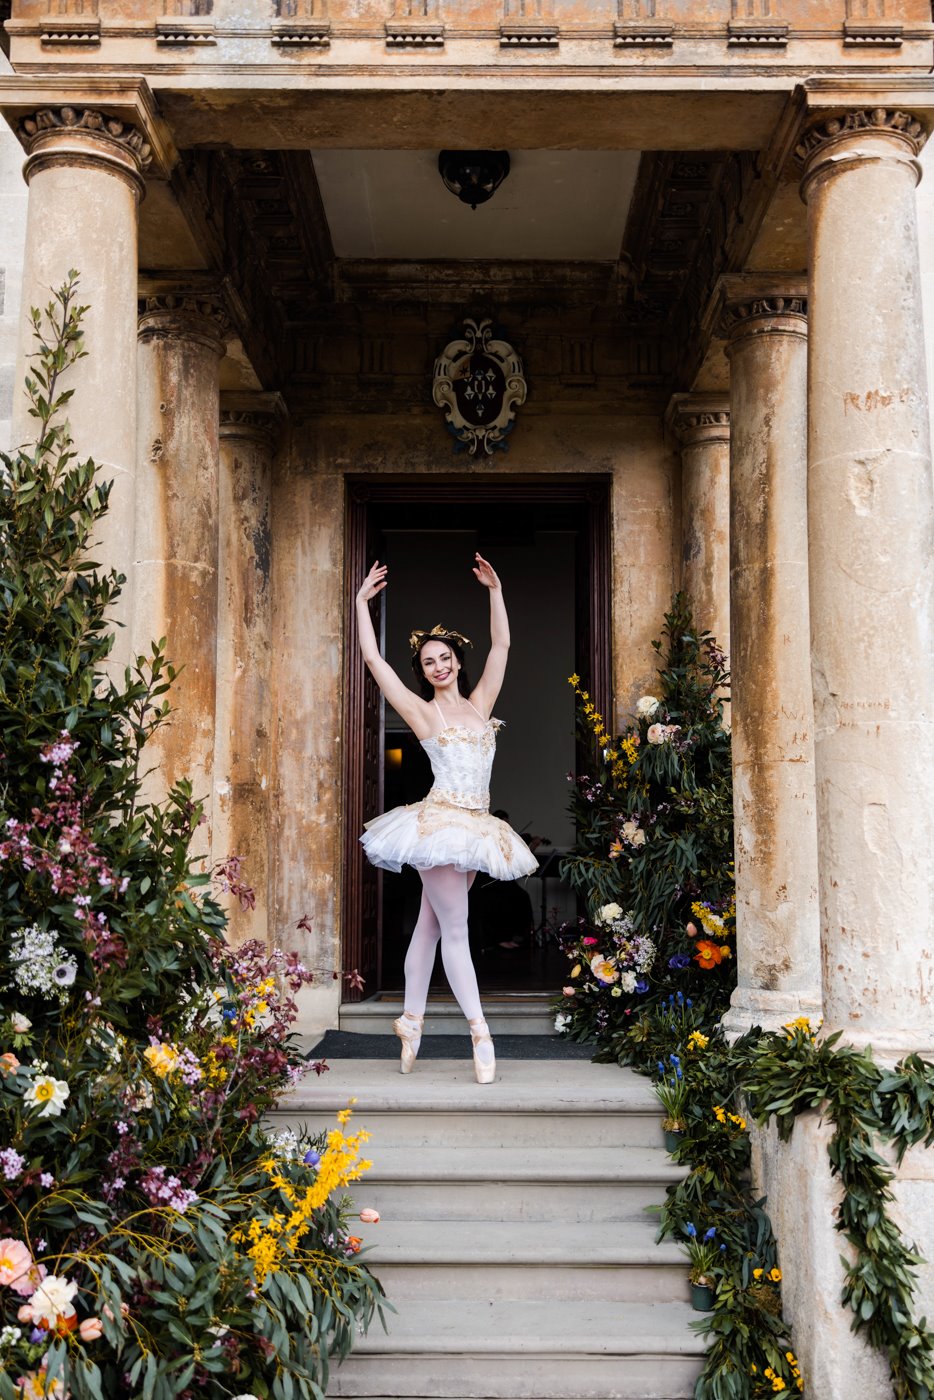 Divine company festival walkabout entertainment ballerina in white stands on steps with columns at stately home elmore court at unusual festival style wedding fair in gloucestershire 